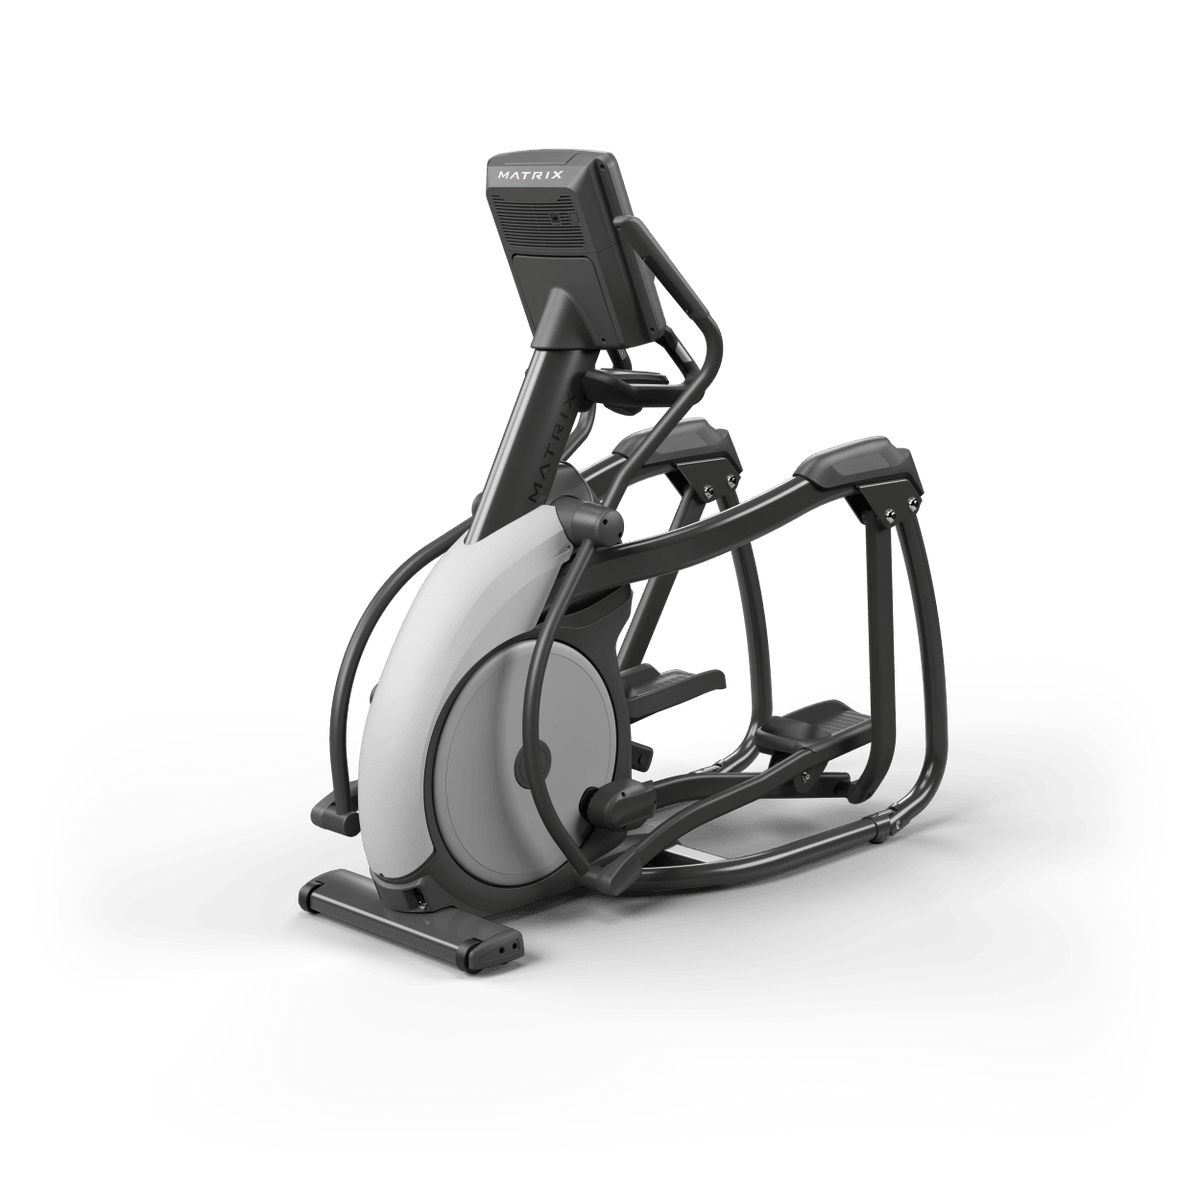 Matrix Fitness Performance Elliptical with LED Console rear view | Fitness Experience